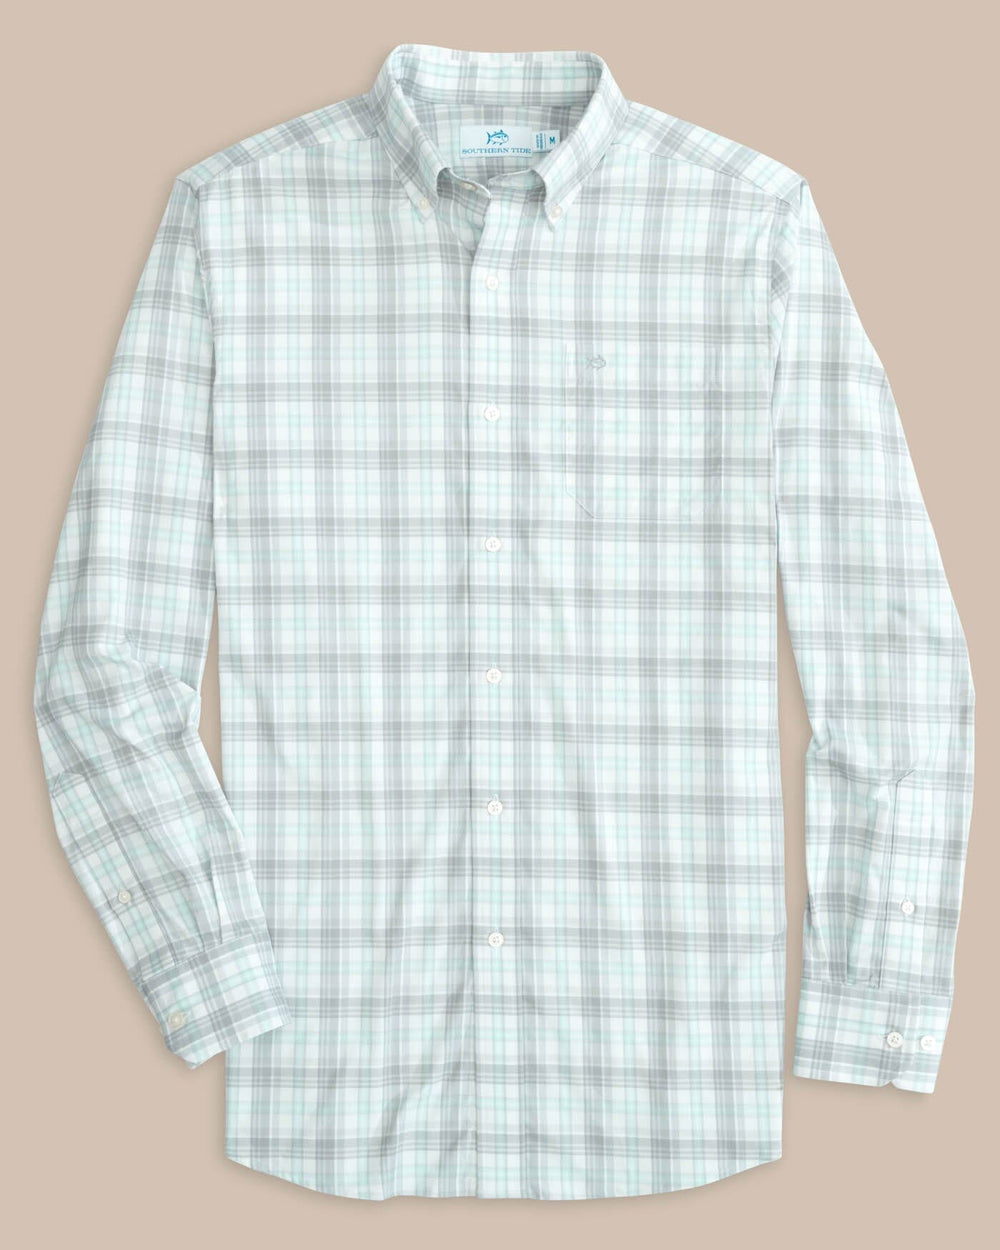 The front view of the Southern Tide Intercoastal West End Plaid Long Sleeve Sport Shirt by Southern Tide - Platinum Grey